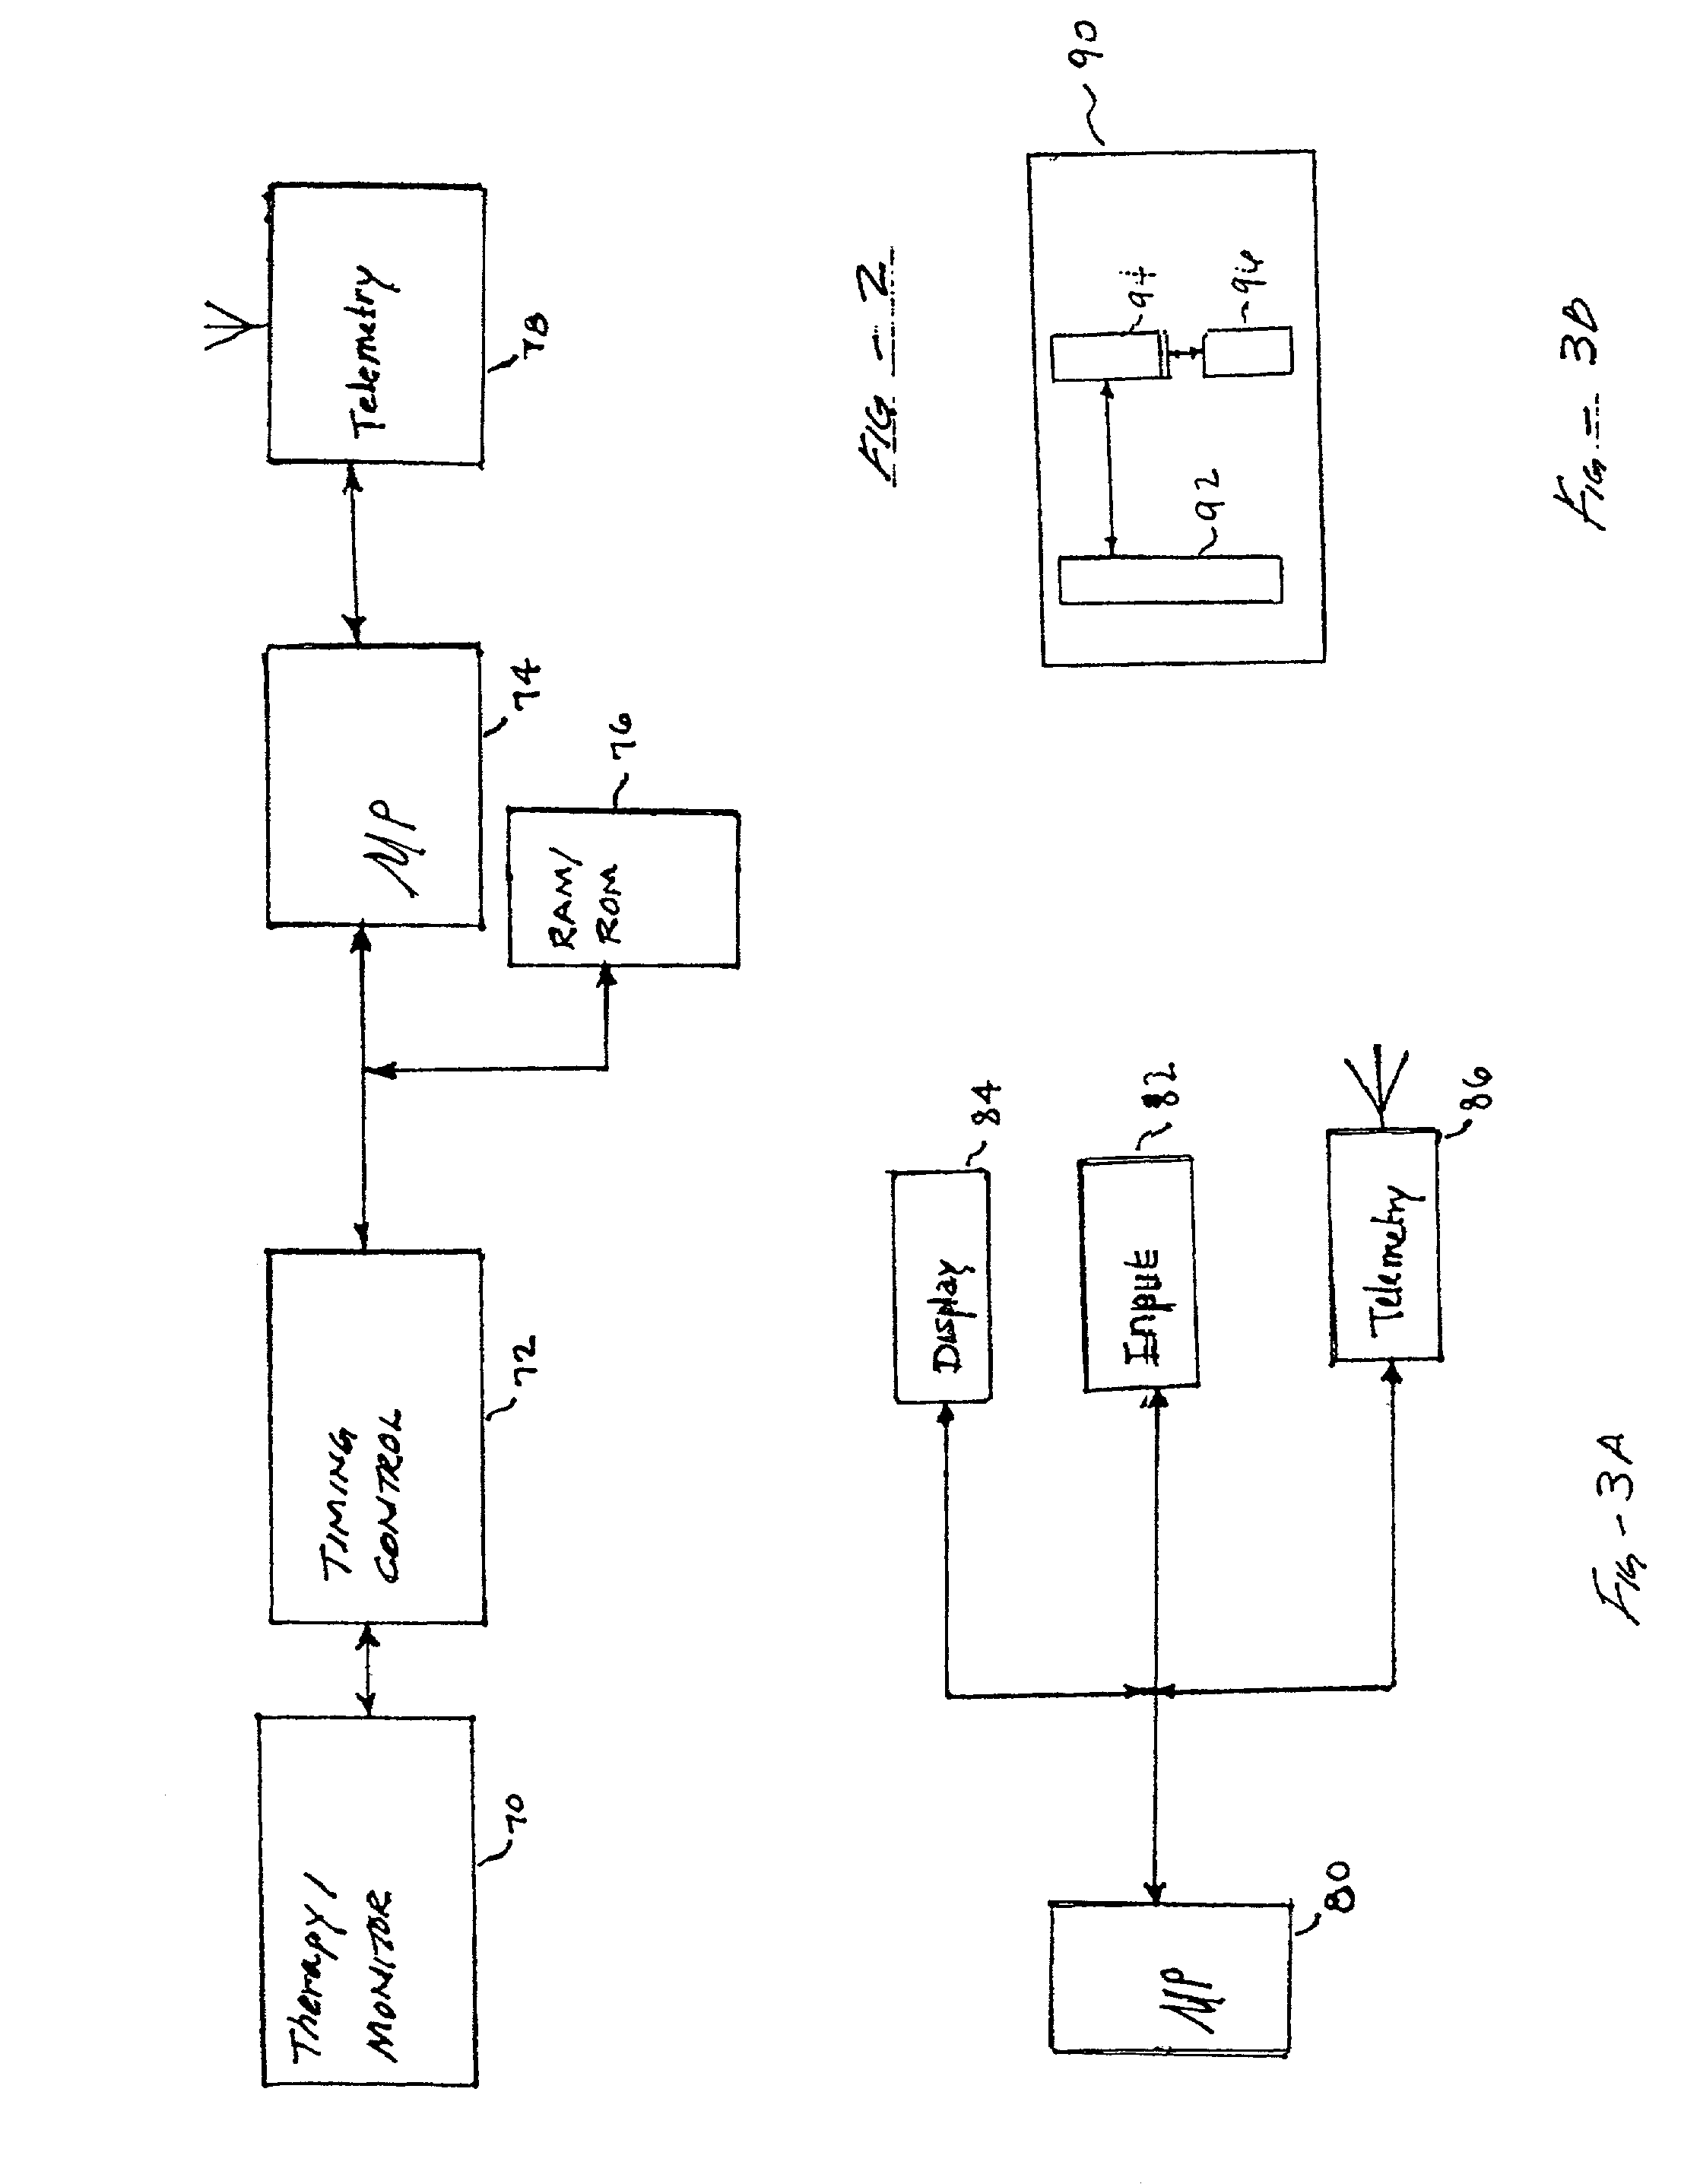 Method and apparatus for remotely programming implantable medical devices